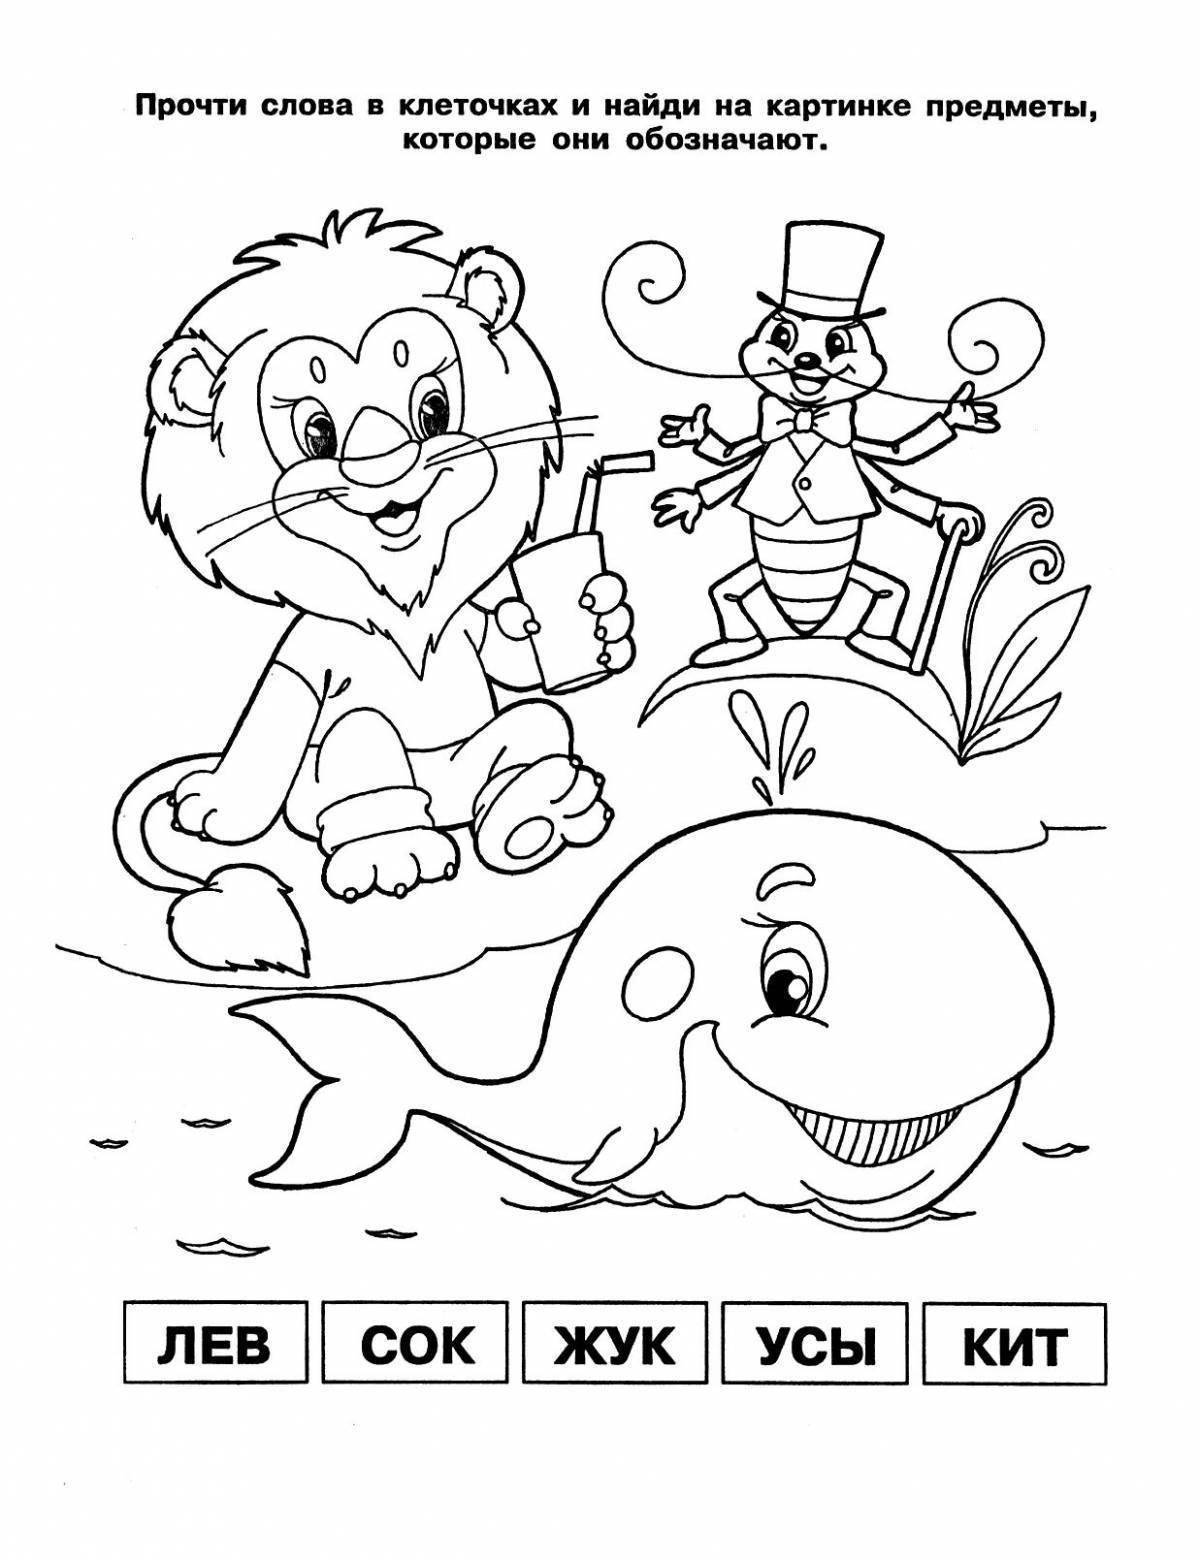 Stimulating syllable coloring pages for preschoolers 6-7 years old